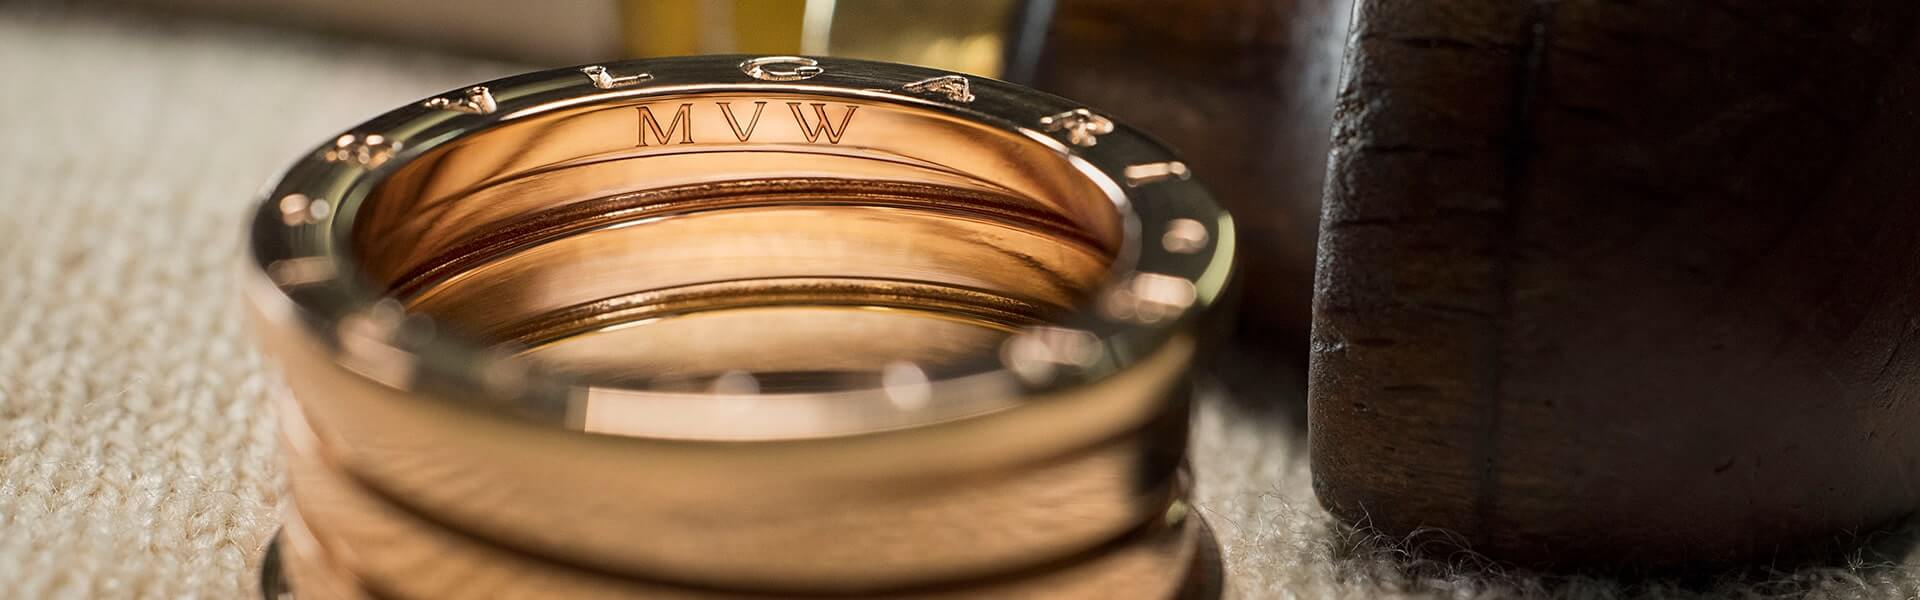 bzero1 ring in rose gold with engraving, close-up.